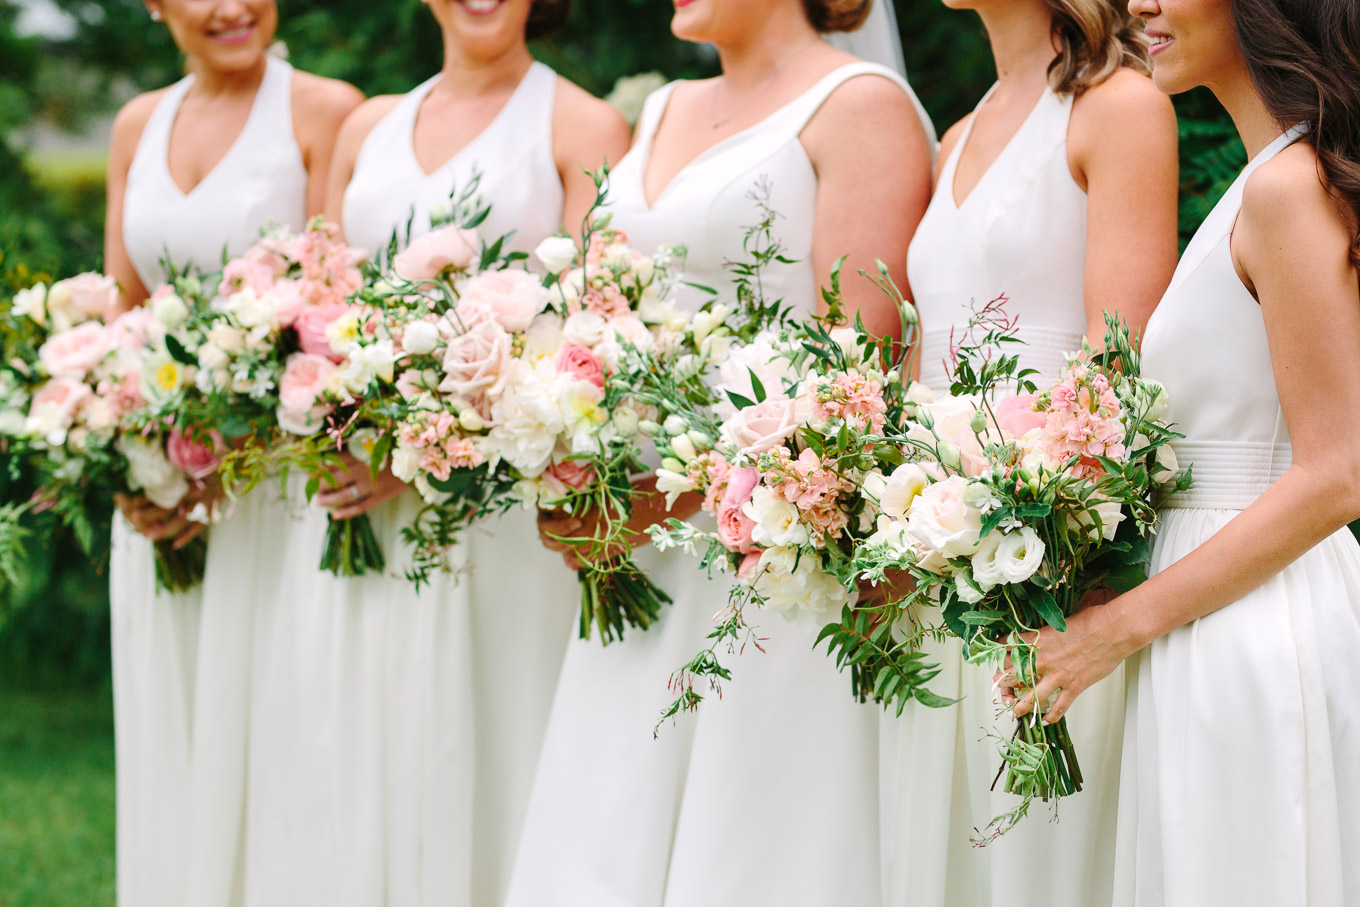 Pink and neutral wedding bouquets and bridal party in white. Beautiful light pink and neutral bridal bouquet. Millbrook Resort Queenstown New Zealand wedding by Mary Costa Photography | www.marycostaweddings.com